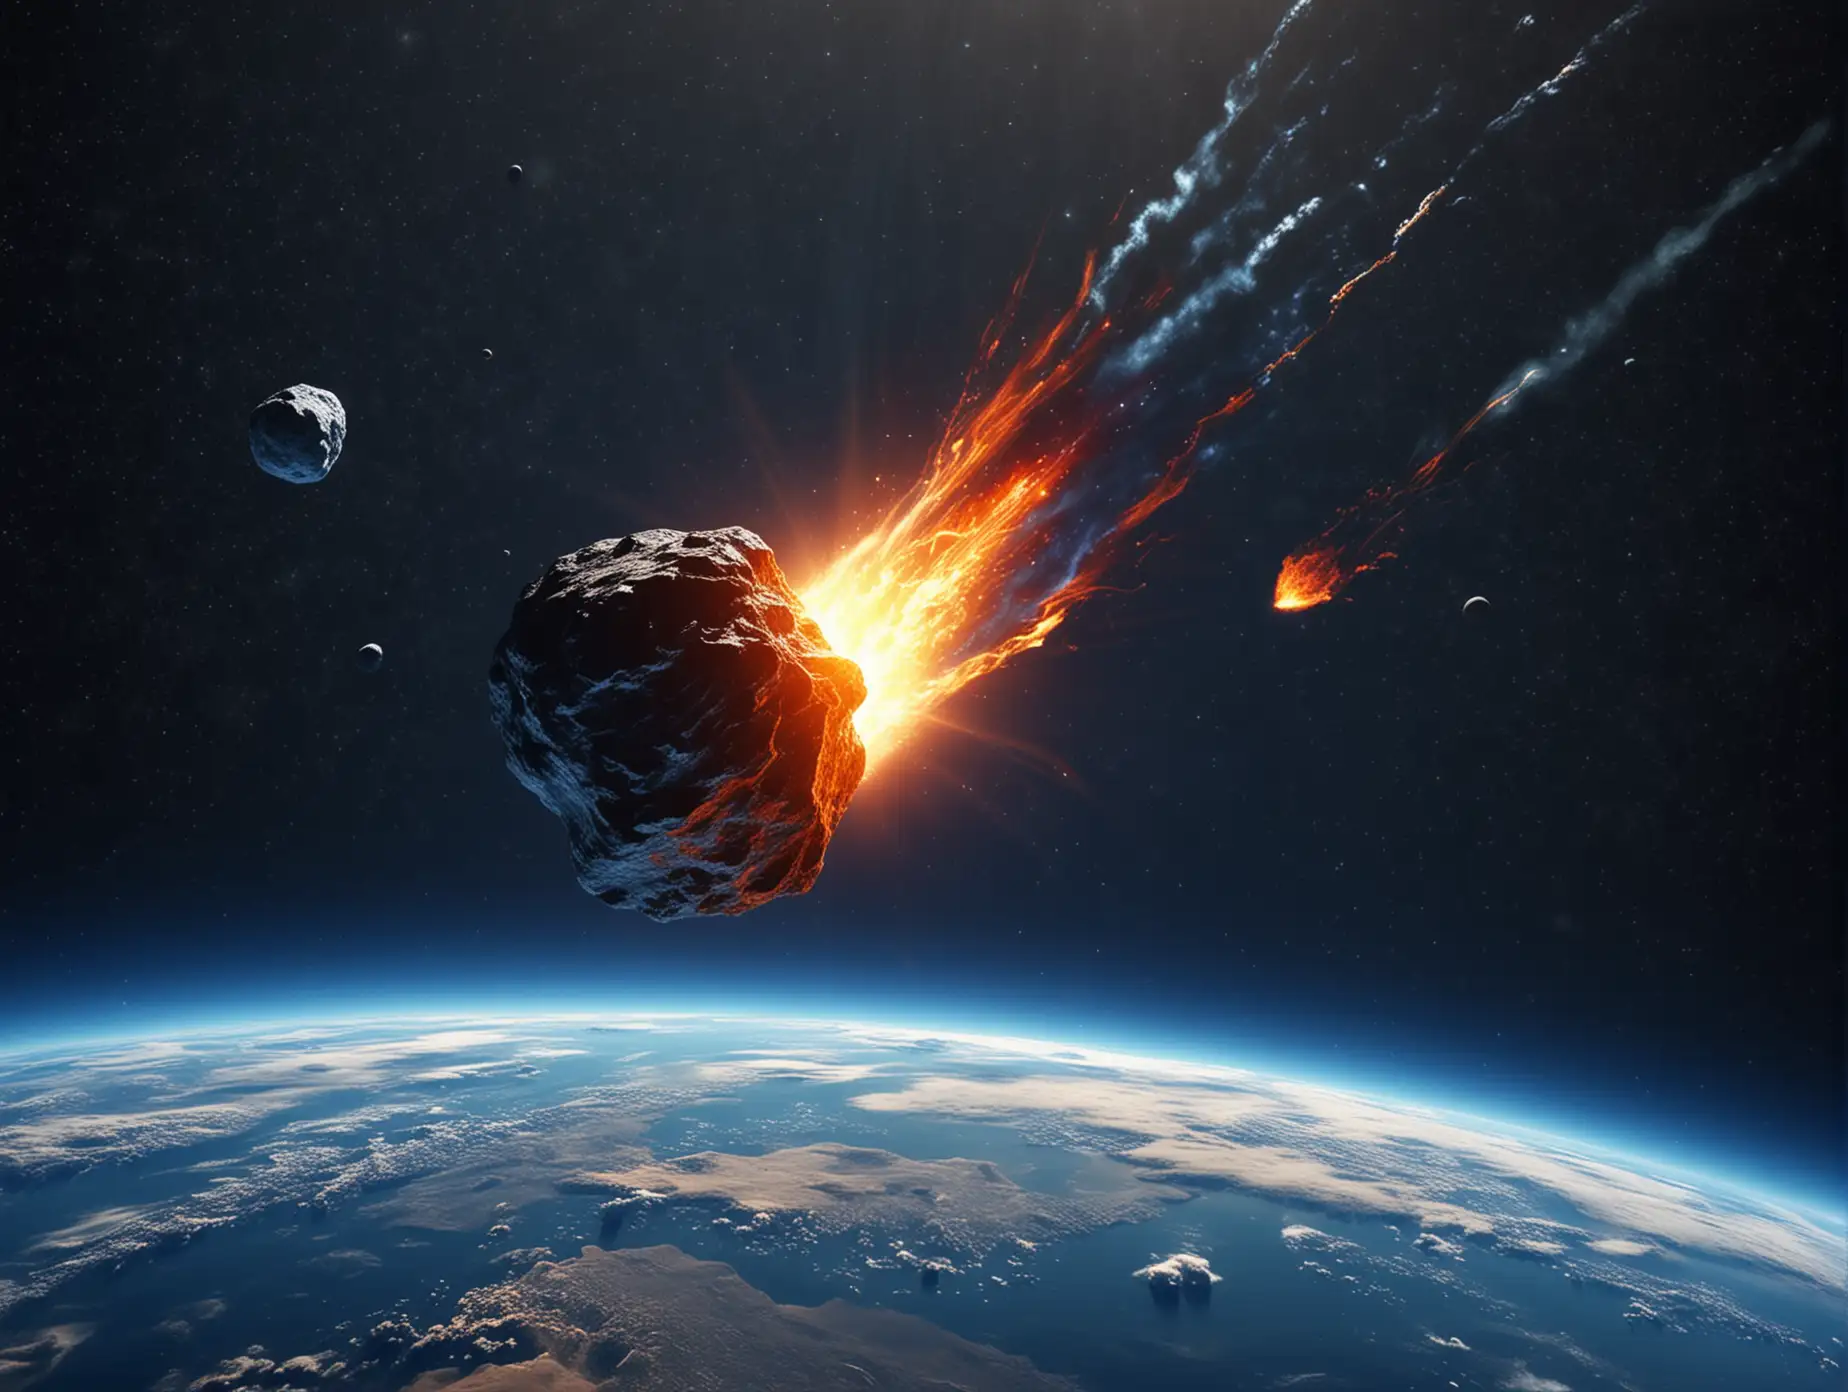 an asteroid approaching the planet Earth at high speed against the background of the dark blue sky, the Earth is further away and we can see the outline of the continents on it, and the meteor has a flame behind it
